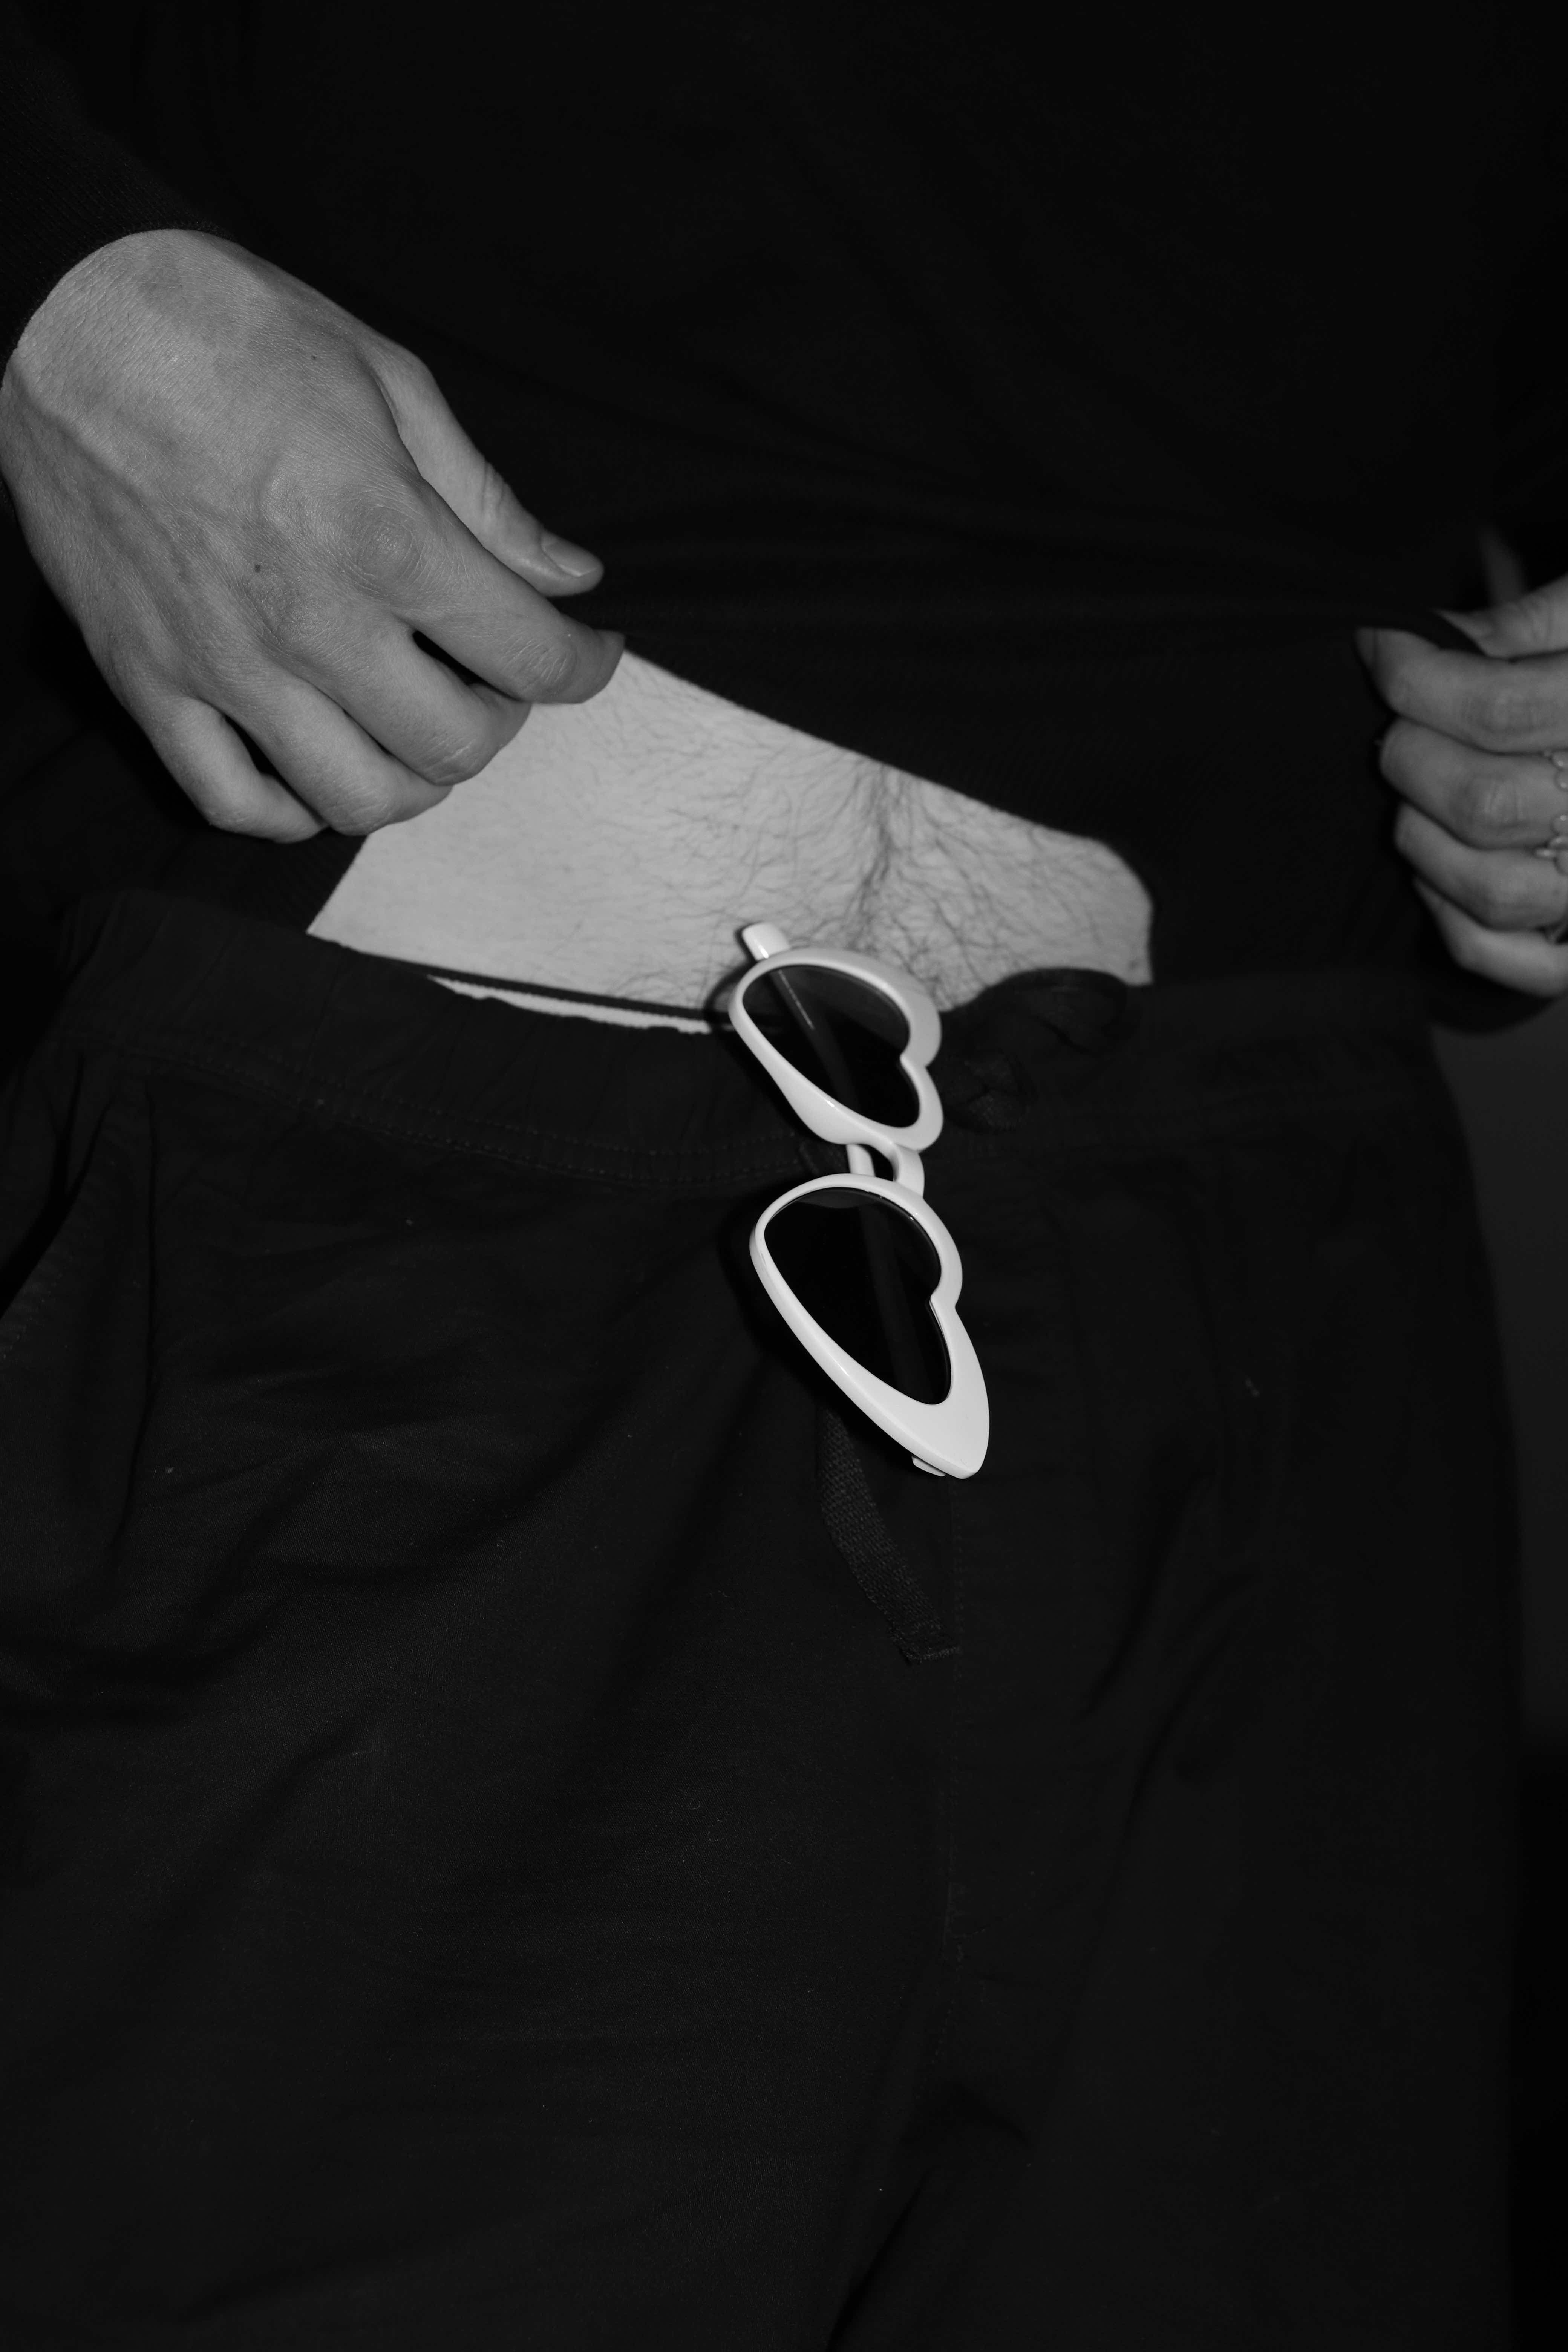  Black and white photograph. Heartshaped sunglasses hanging from the belt of the portrayed. Part of the belly is exposed..